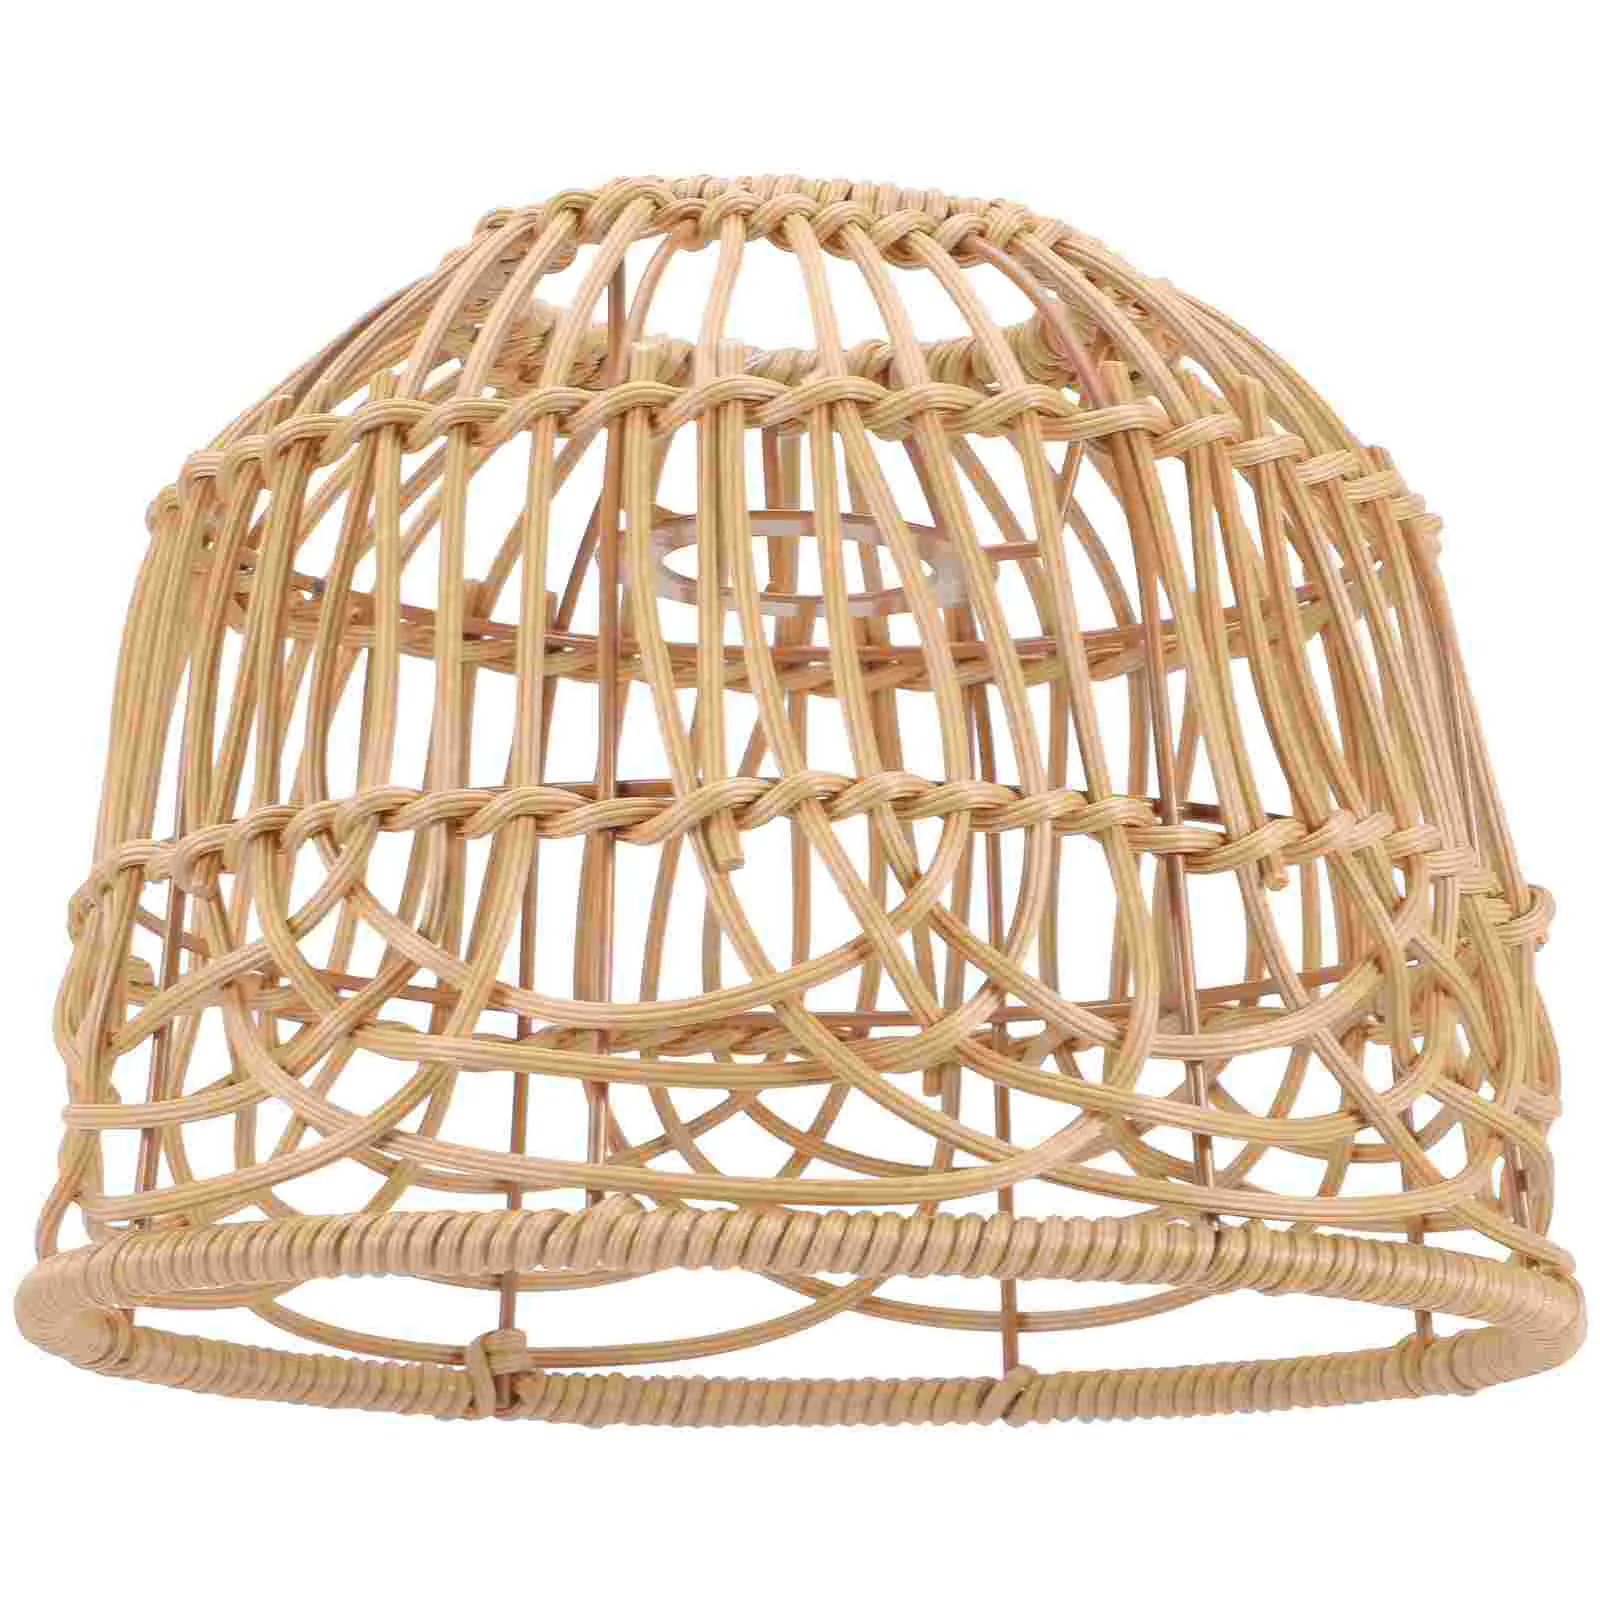 Light Covers Rattan Lampshade Shades for Restaurant Retro Ceiling Lights Exquisite Woven